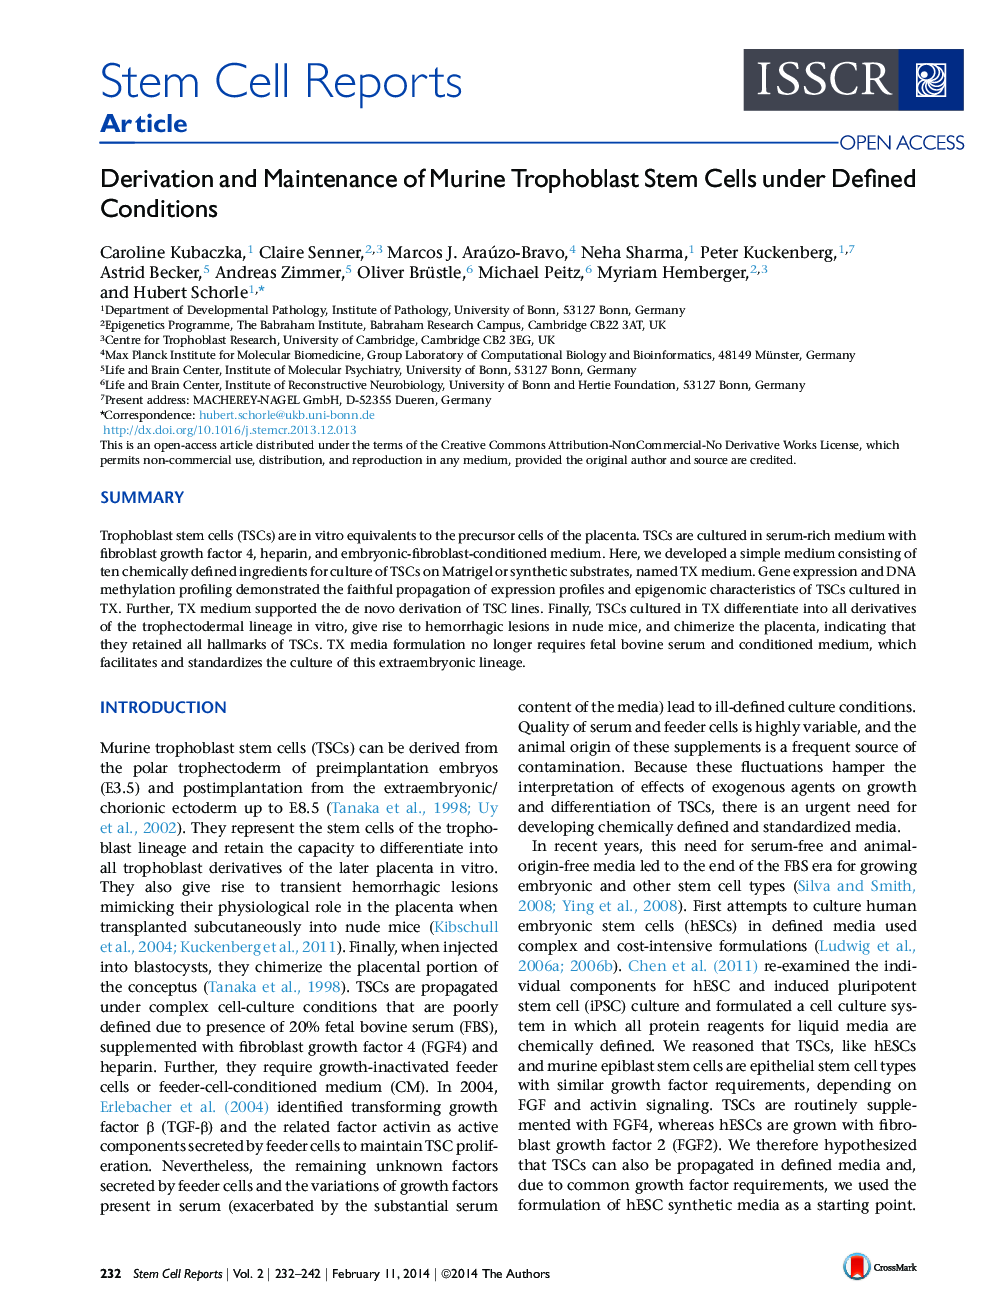 Derivation and Maintenance of Murine Trophoblast Stem Cells under Defined Conditions 